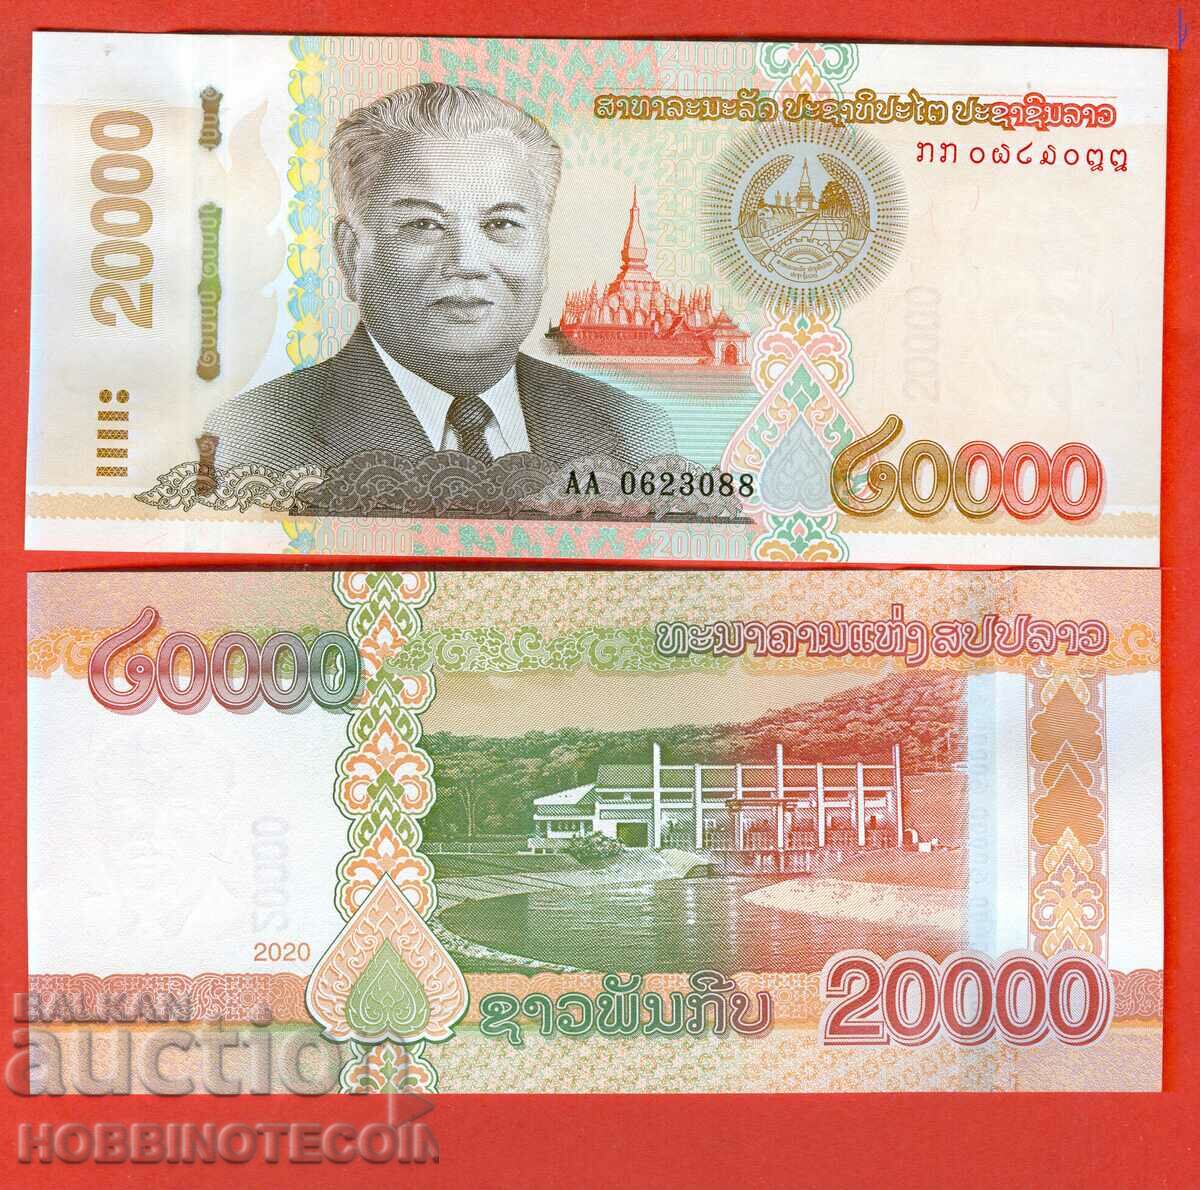 LAOS LAO 20000 20 000 Kip issue issue 2020 2022 NEW UNC